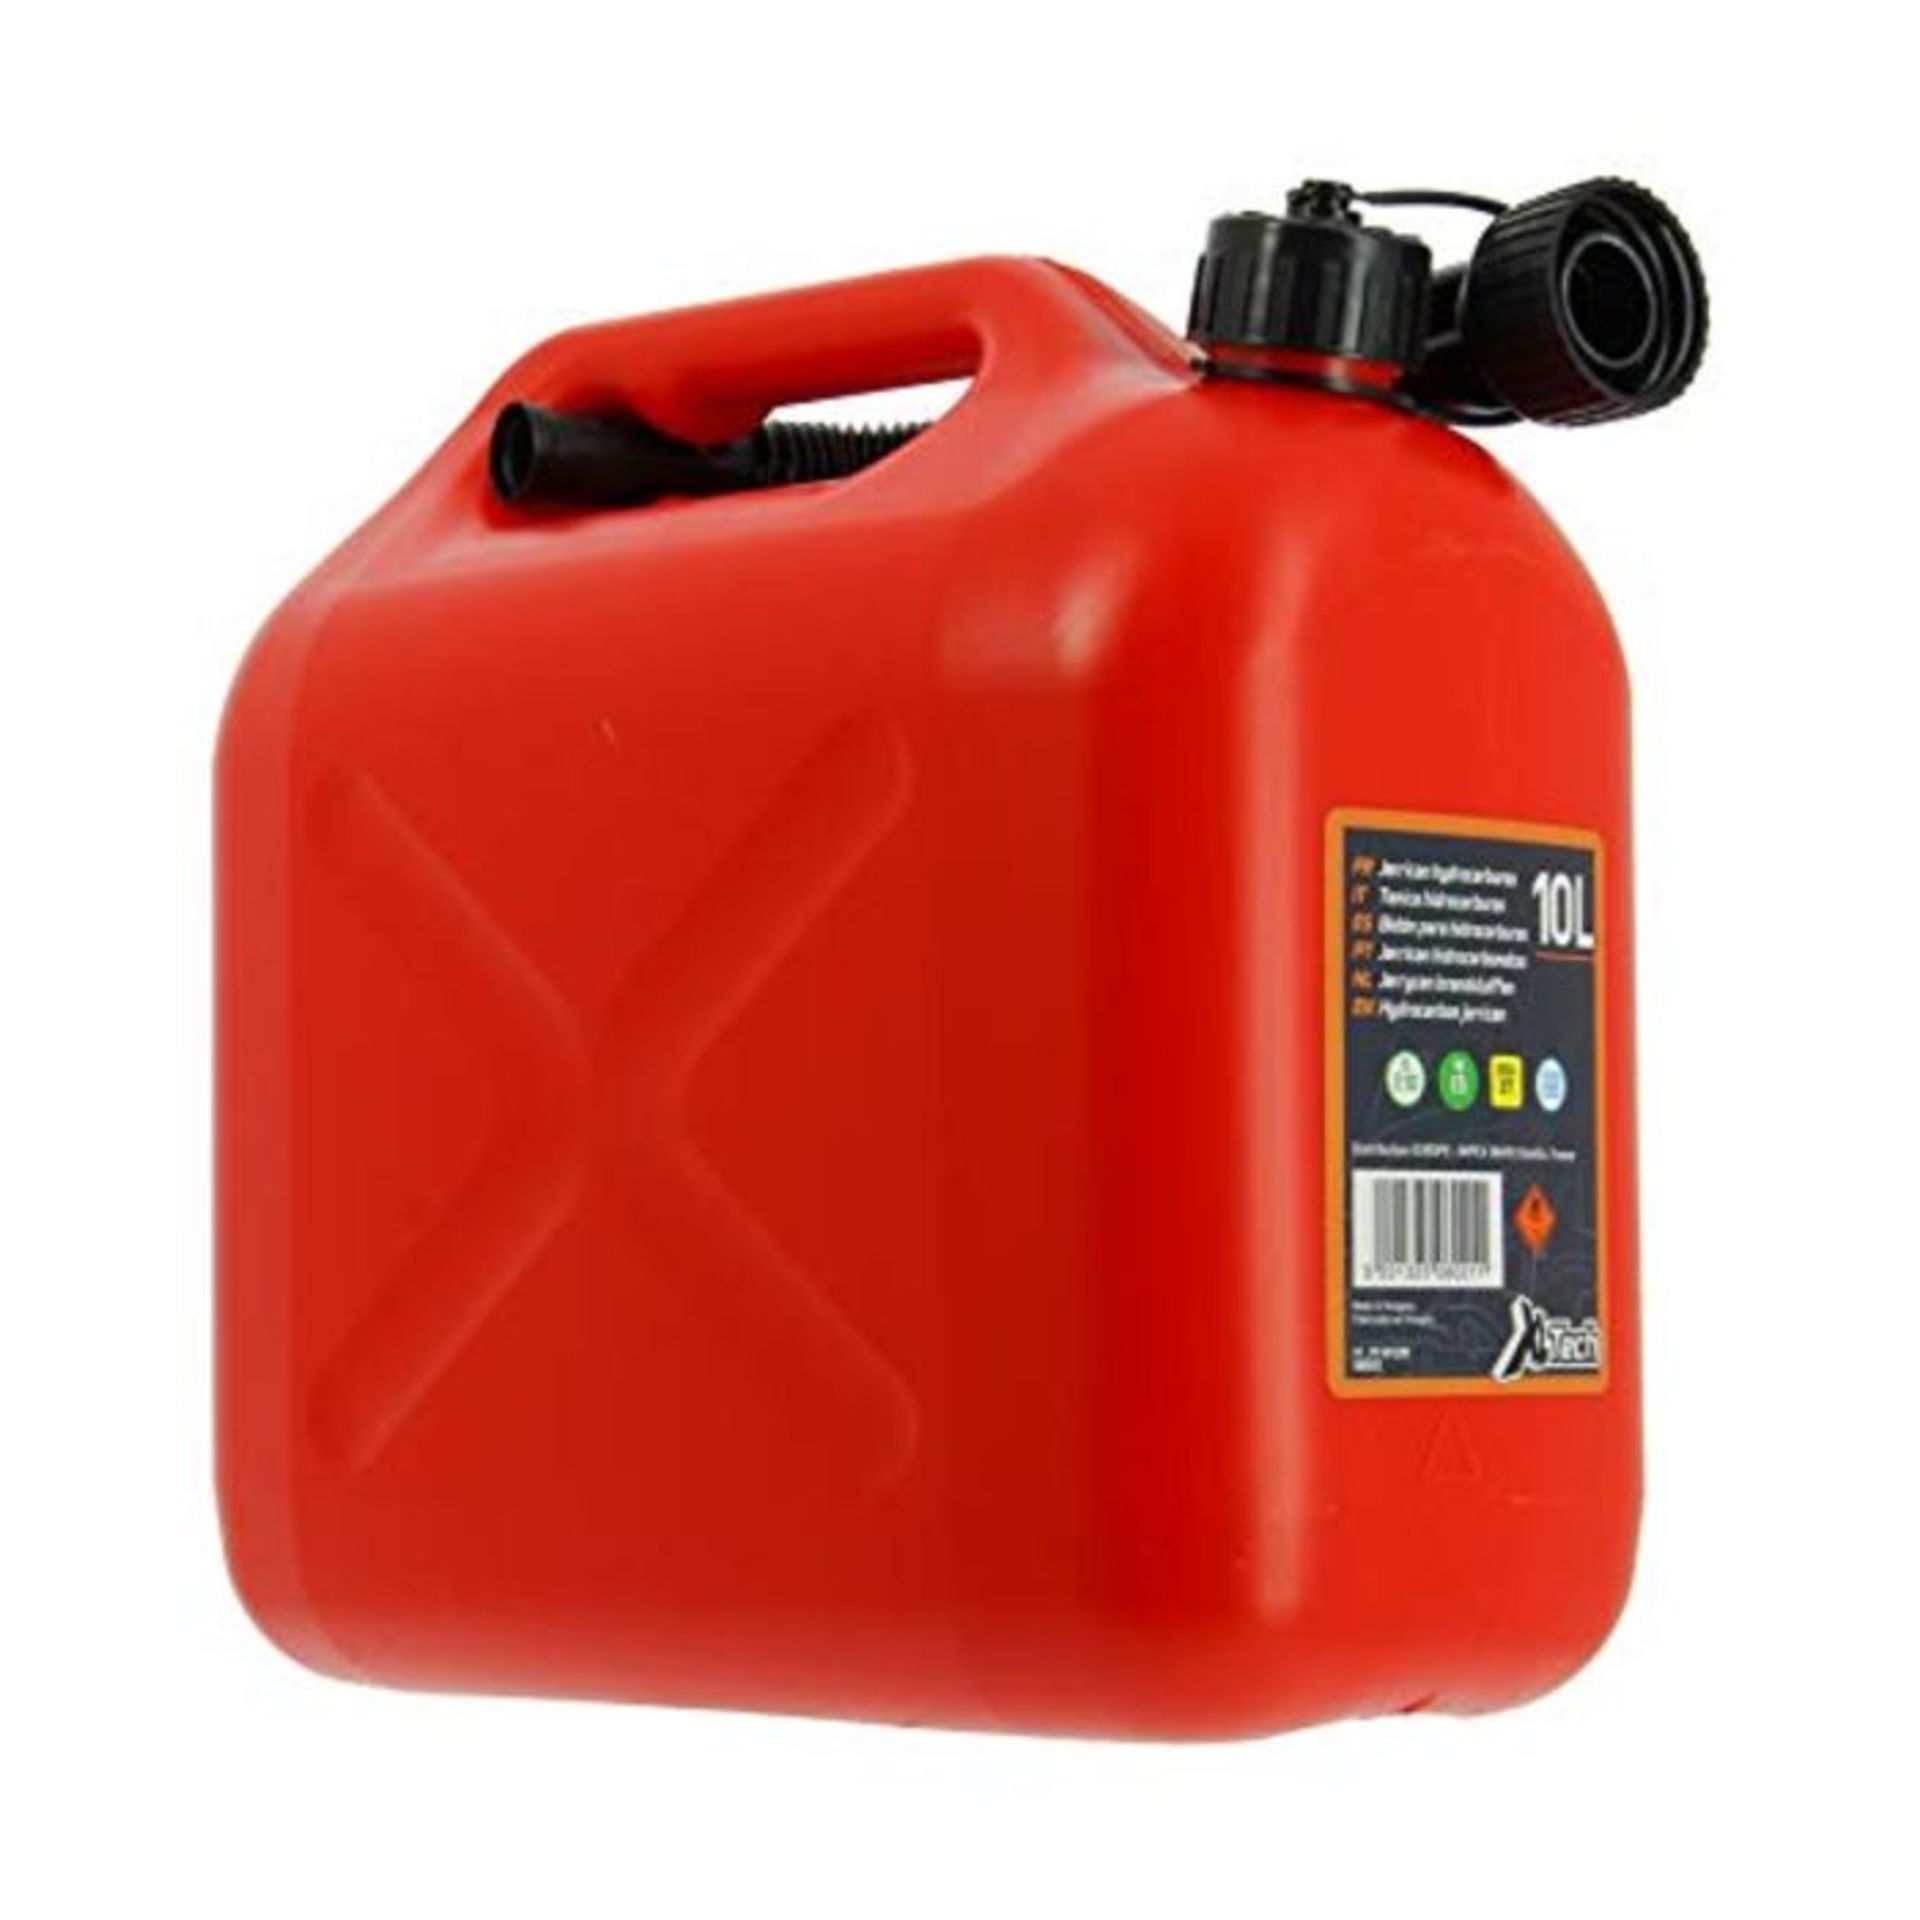 Cartec 506021 Jerry Can for 10 l